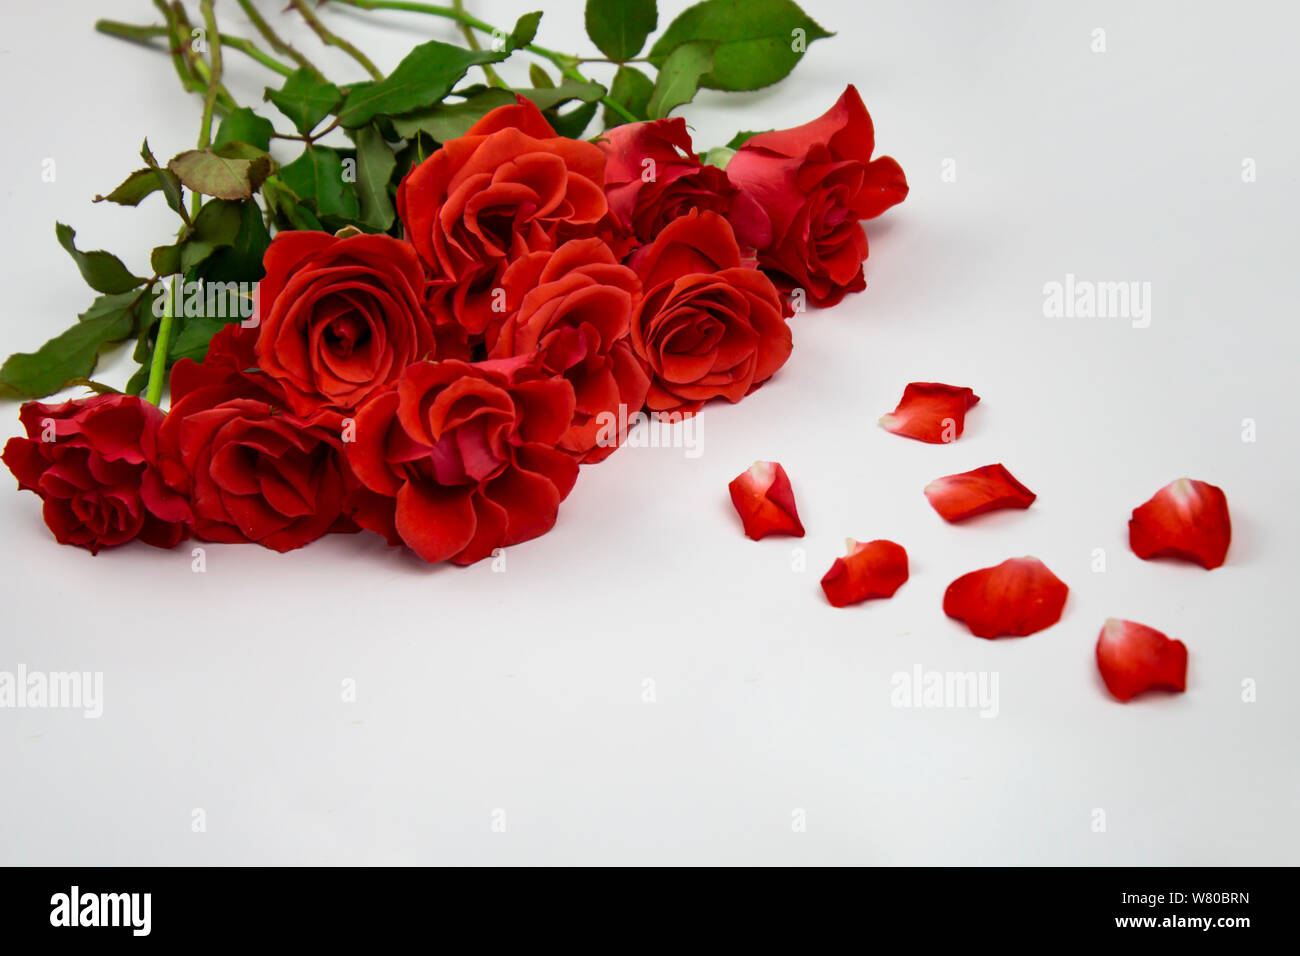 Over 999 Beautiful Rose Flower Images In Stunning 4K Resolution